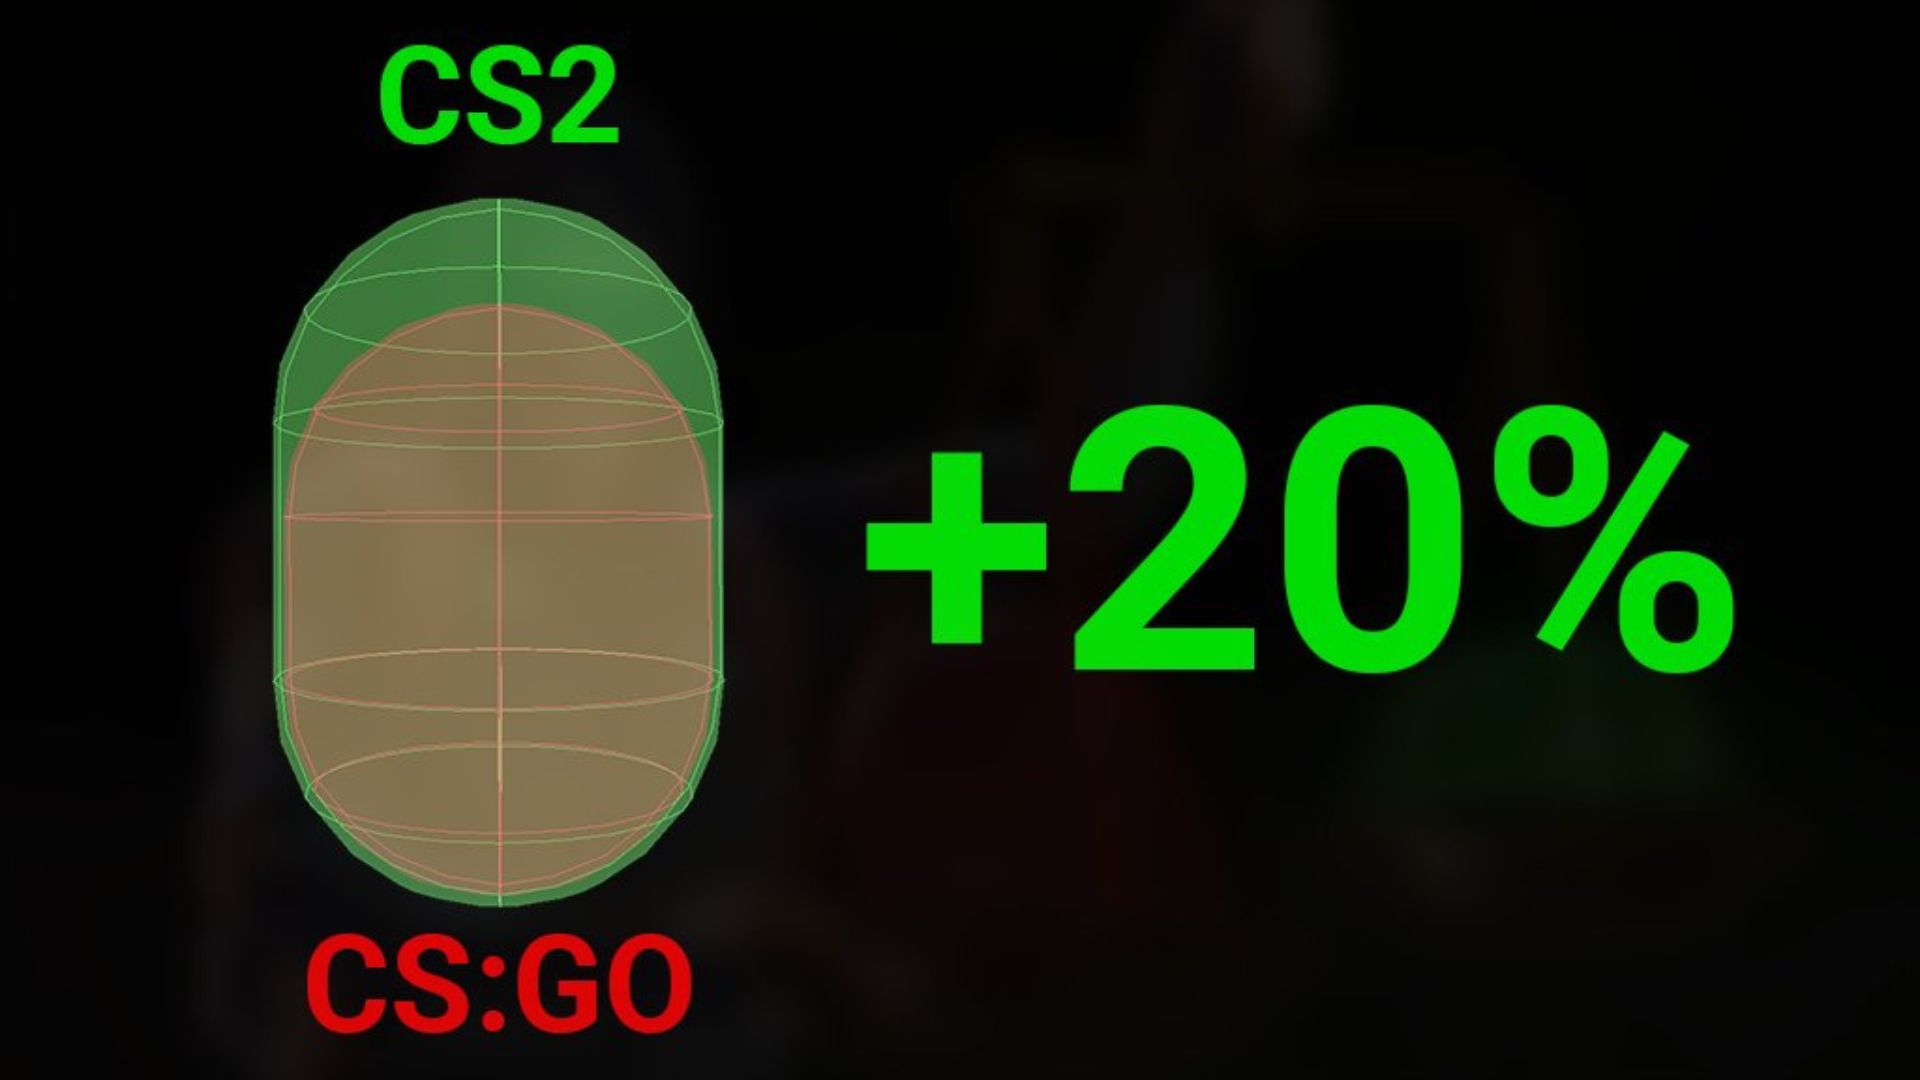 Counter-Strike 2 looks noob friendly - and that’s great news: An image comparing the hitbox in Valve FPS games CSGO and CS2